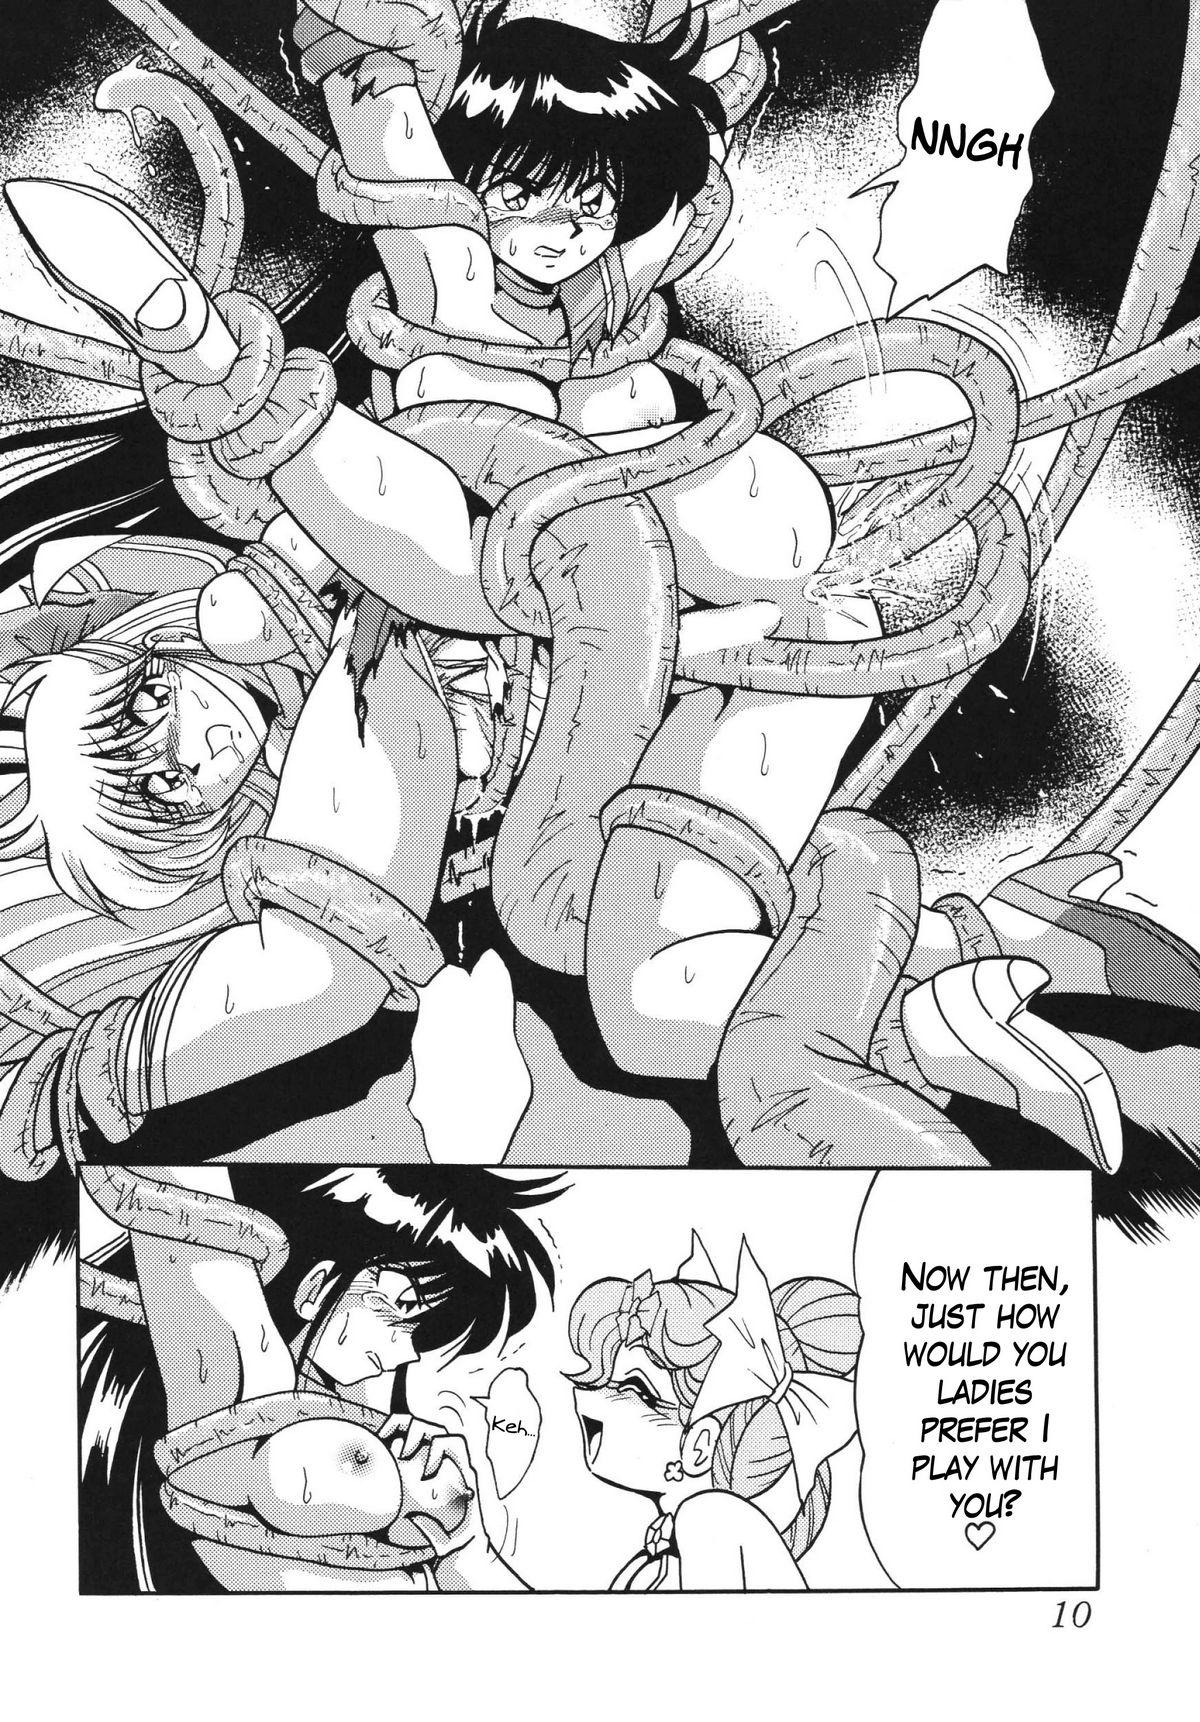 Blondes Silent Saturn SS vol. 5 - Sailor moon Analfucking - Page 10